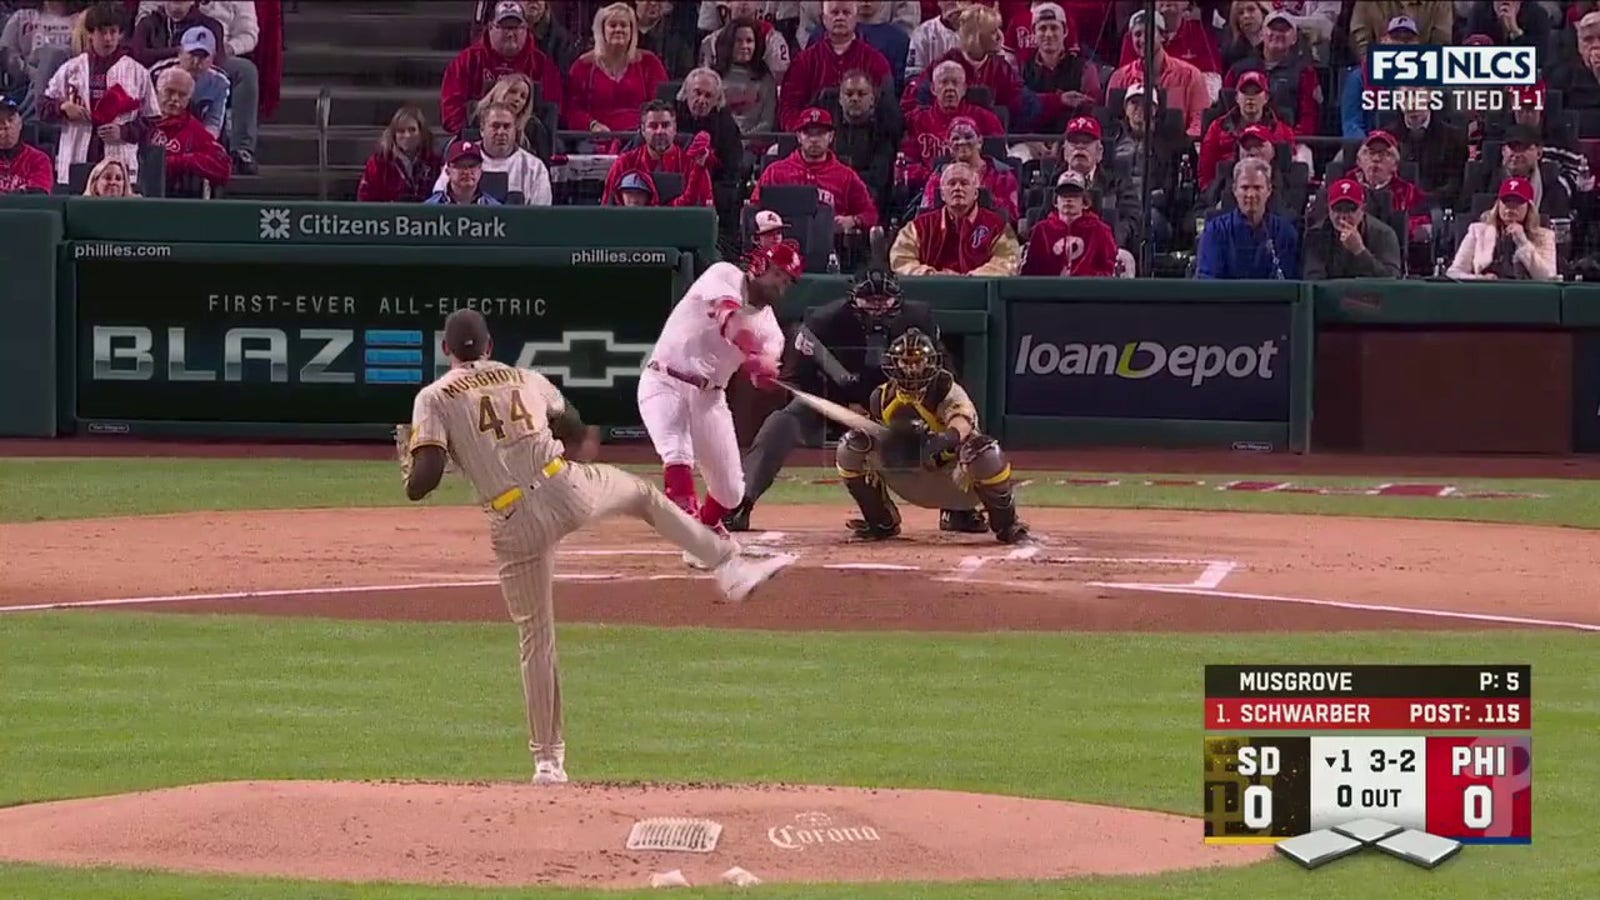 Kyle Schwarber's launches a leadoff home run in Game 3